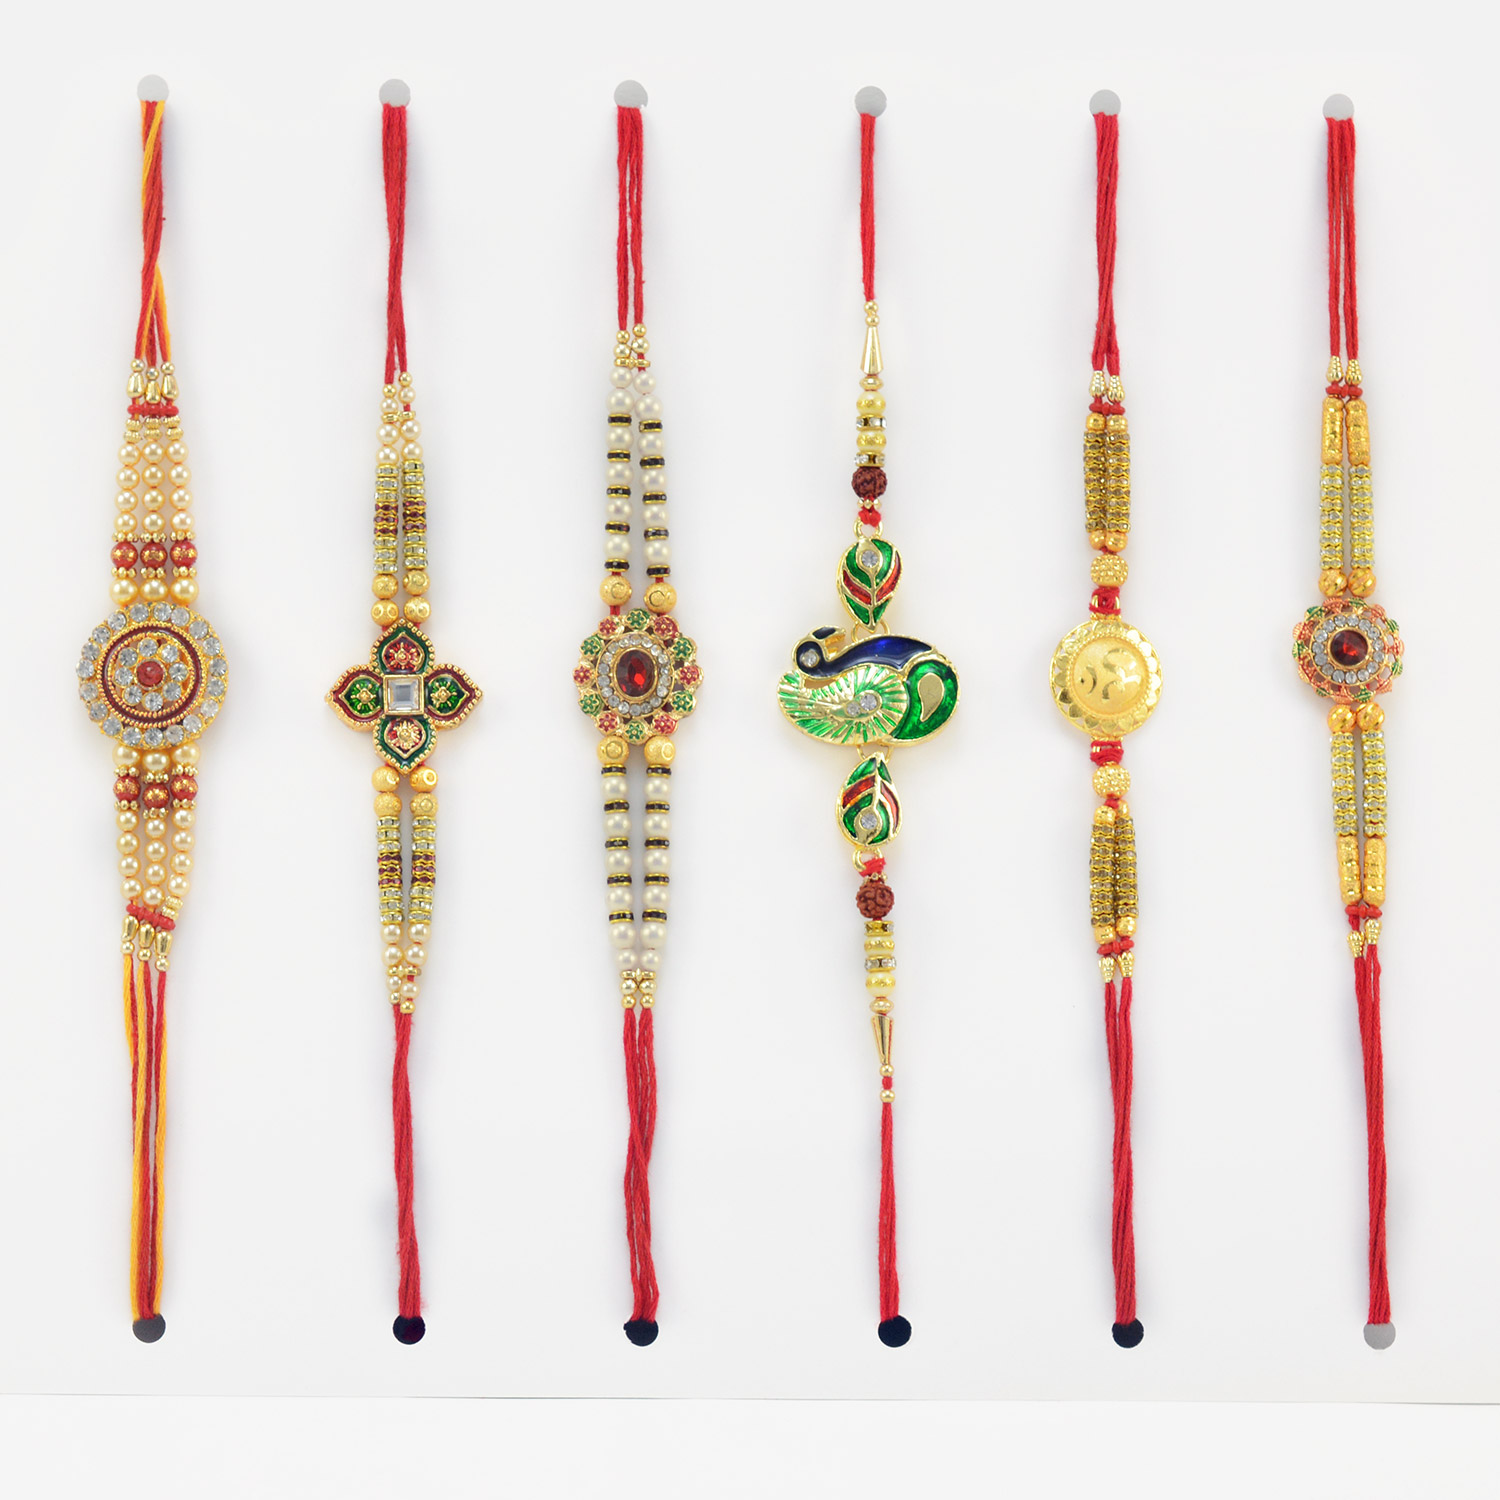 Rich Set of 6 Brother Rakhi of Golden, Beads and Peacock